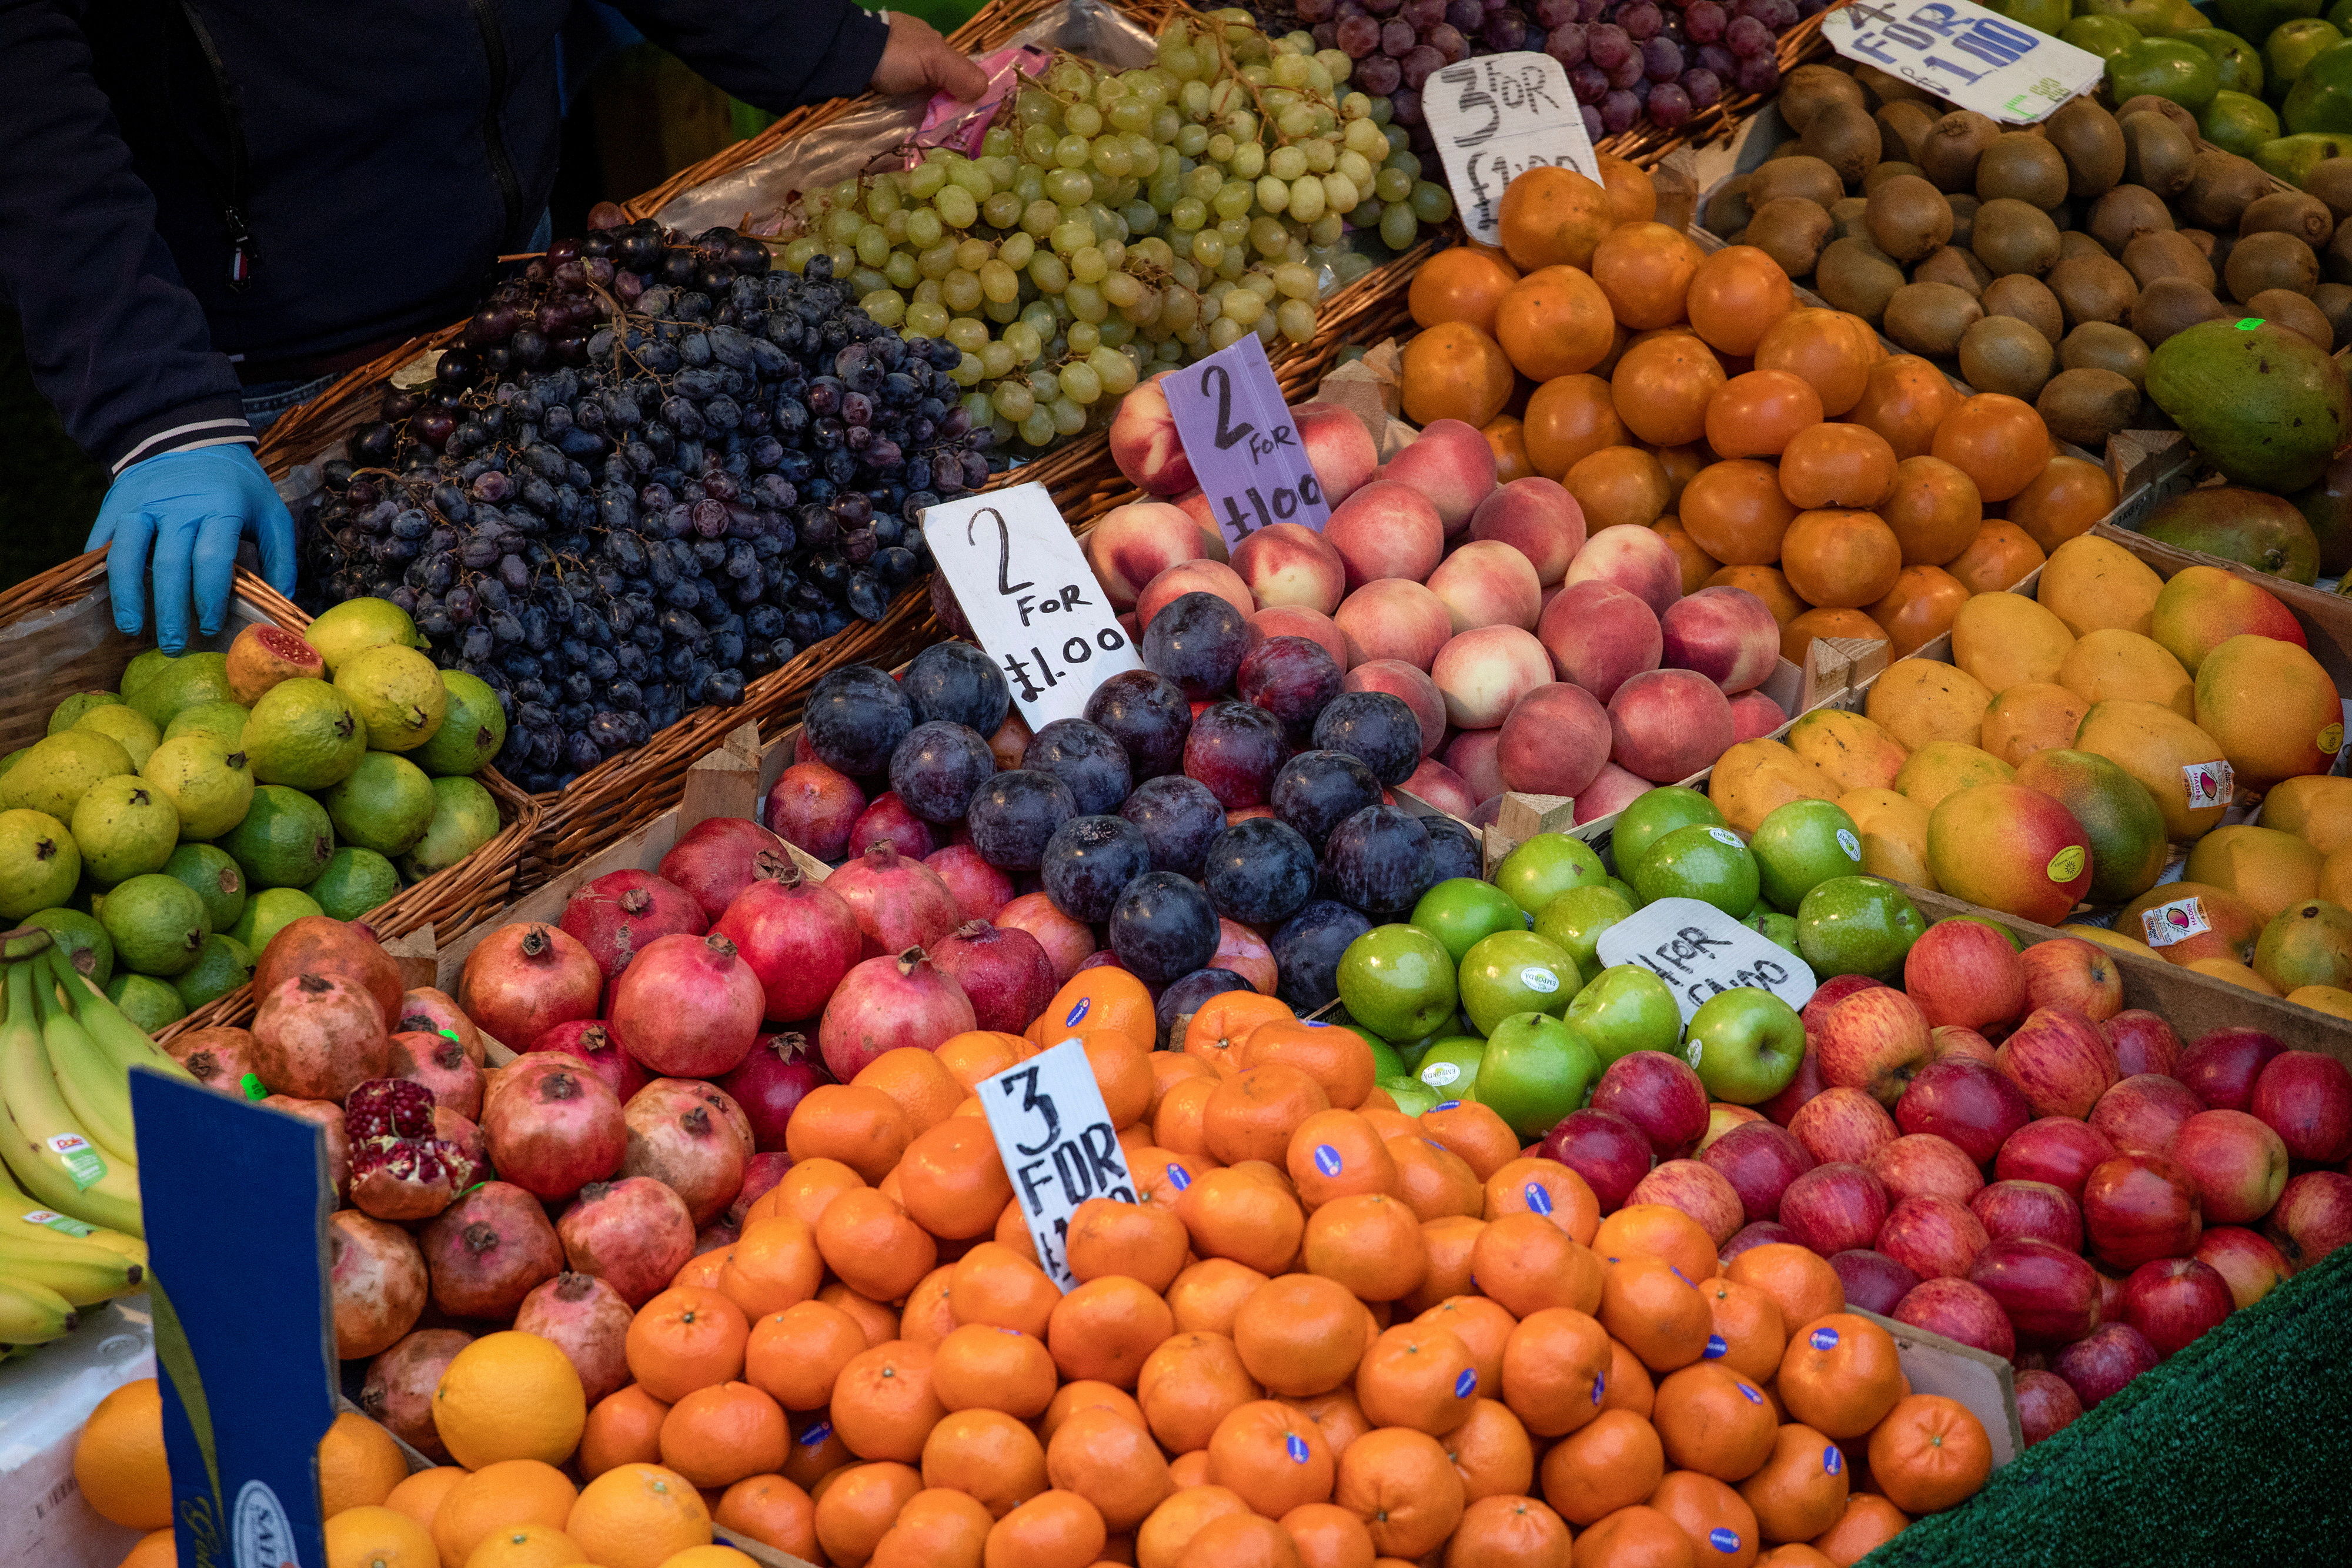 Fruit and vegetables sit on display at a fruit and vegetable  shop at Brixton Market, London, Britain